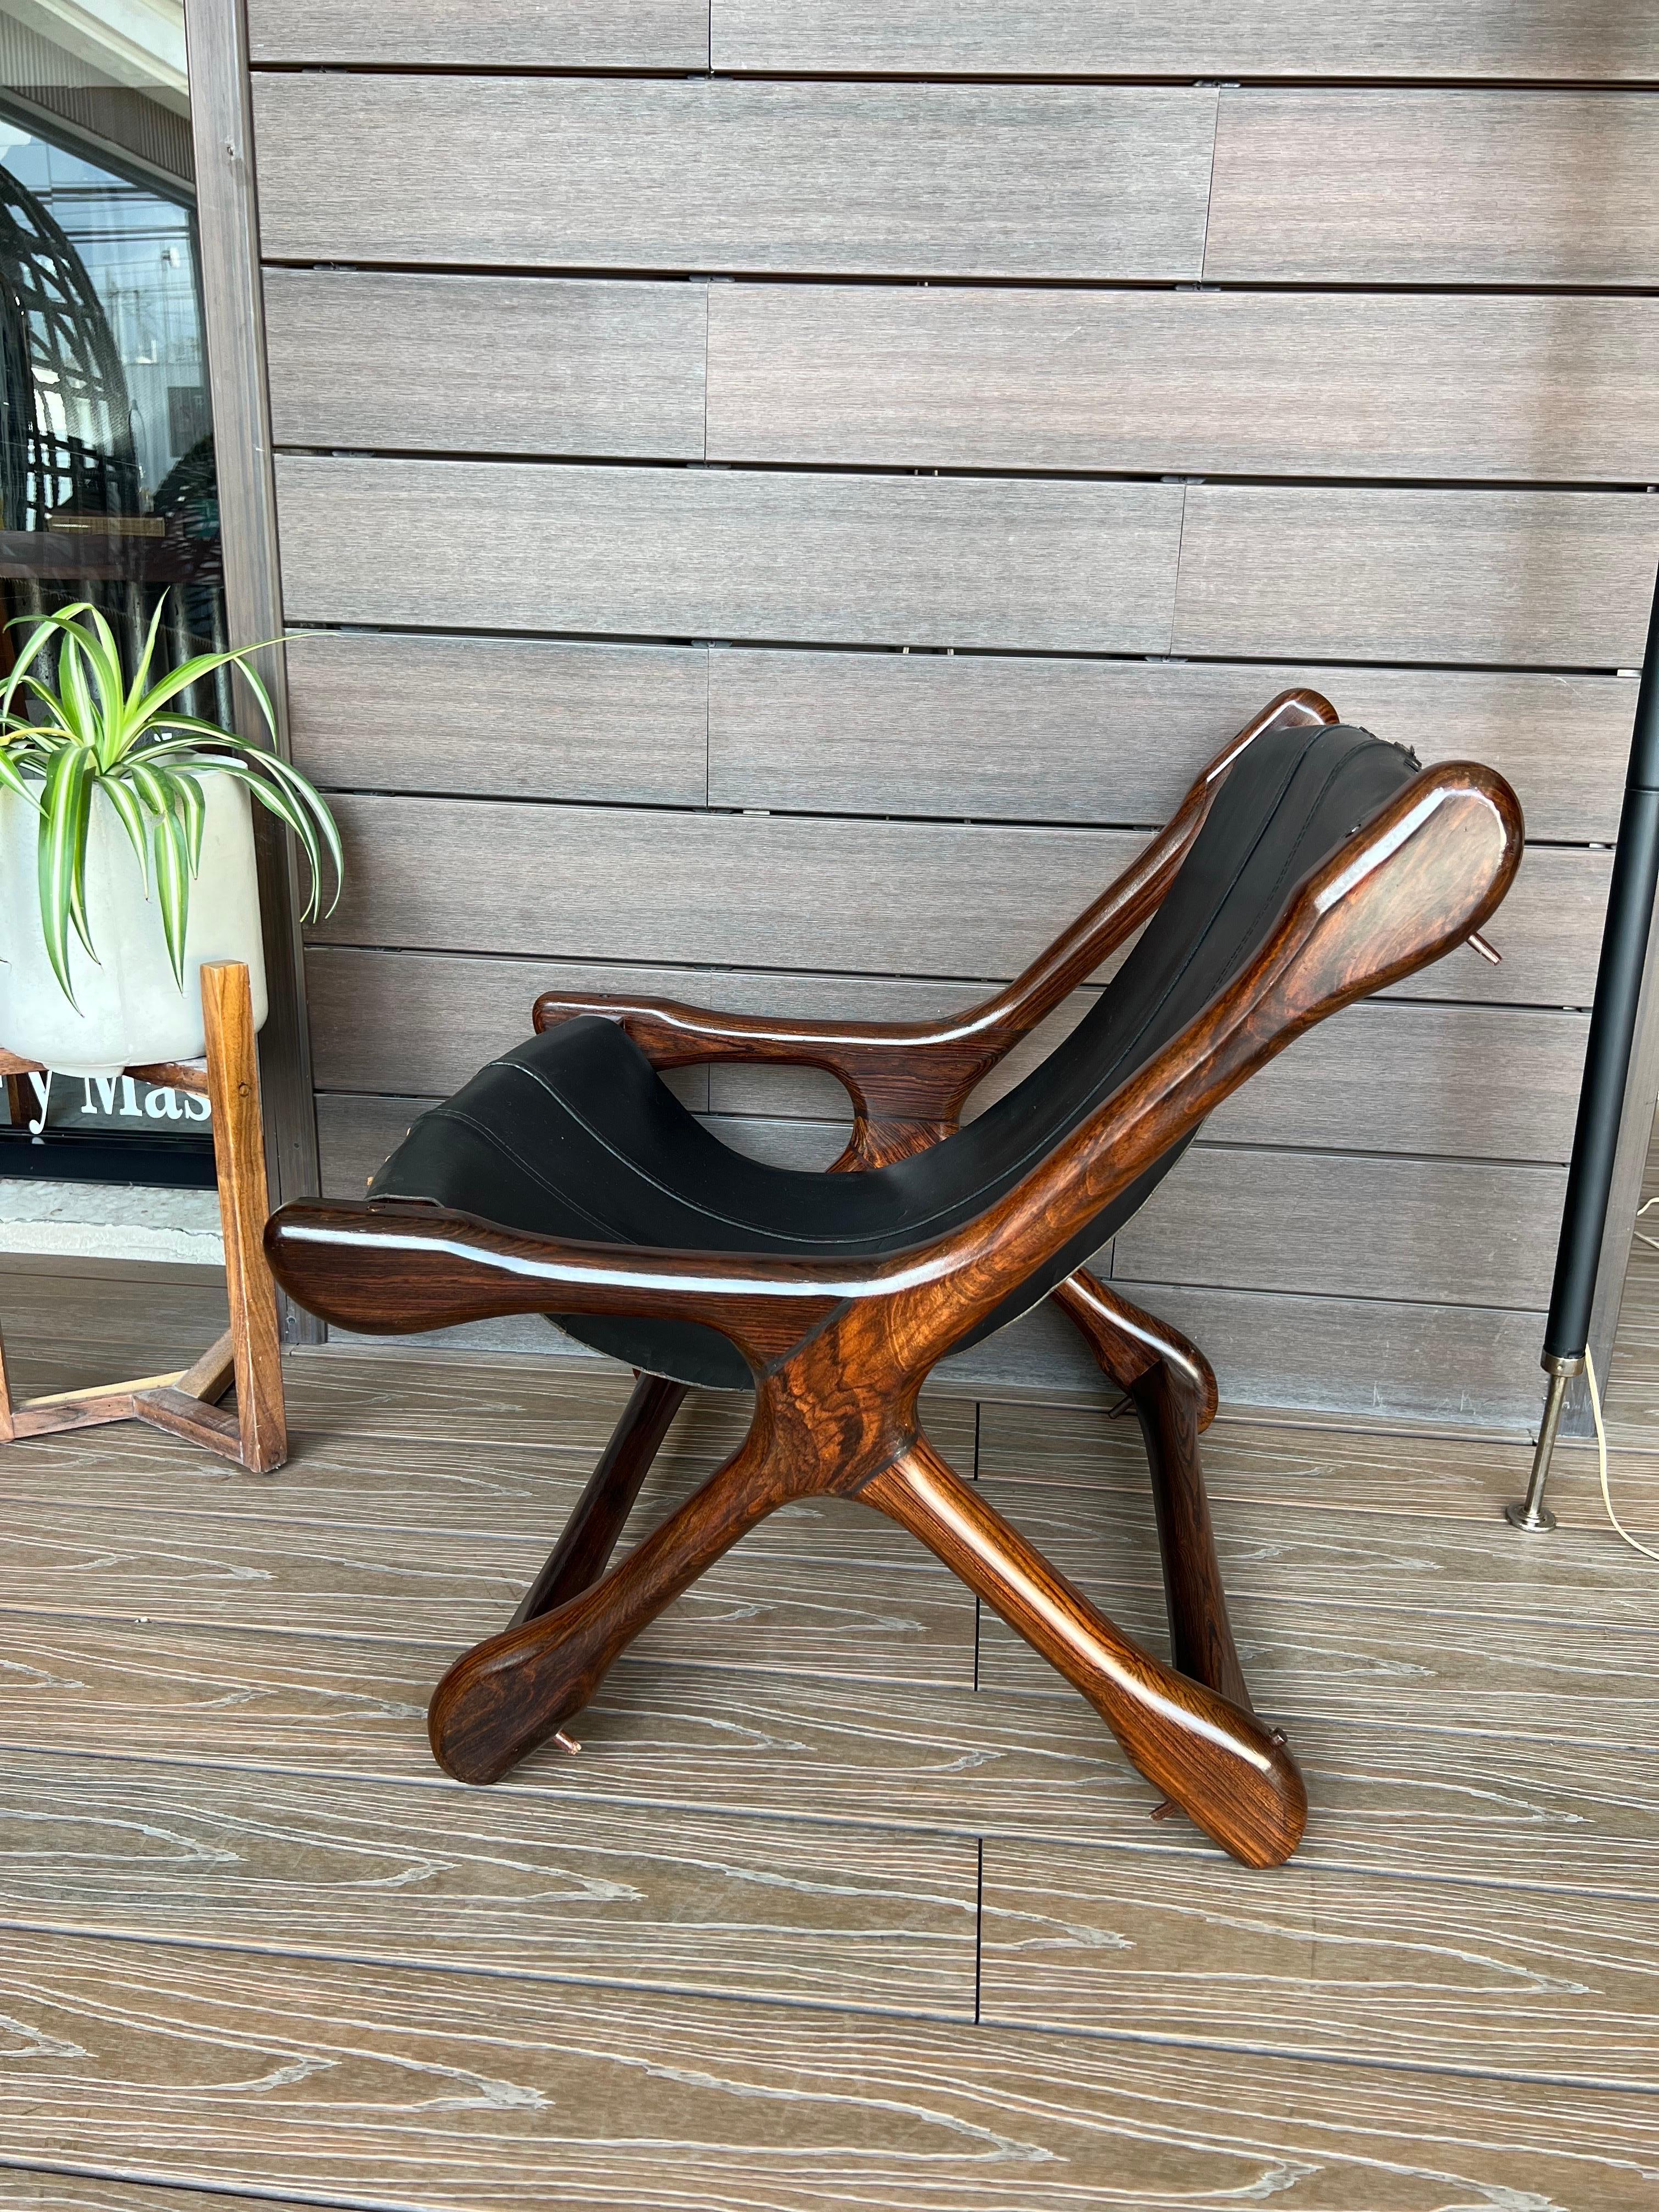 For your consideration, Shoemaker's most iconic chair, The Sloucher from the Sling line, the leather is original as are the buttons that are nailed to the wood (two out of twenty were replaced), the wood was completely restored. The condition of the